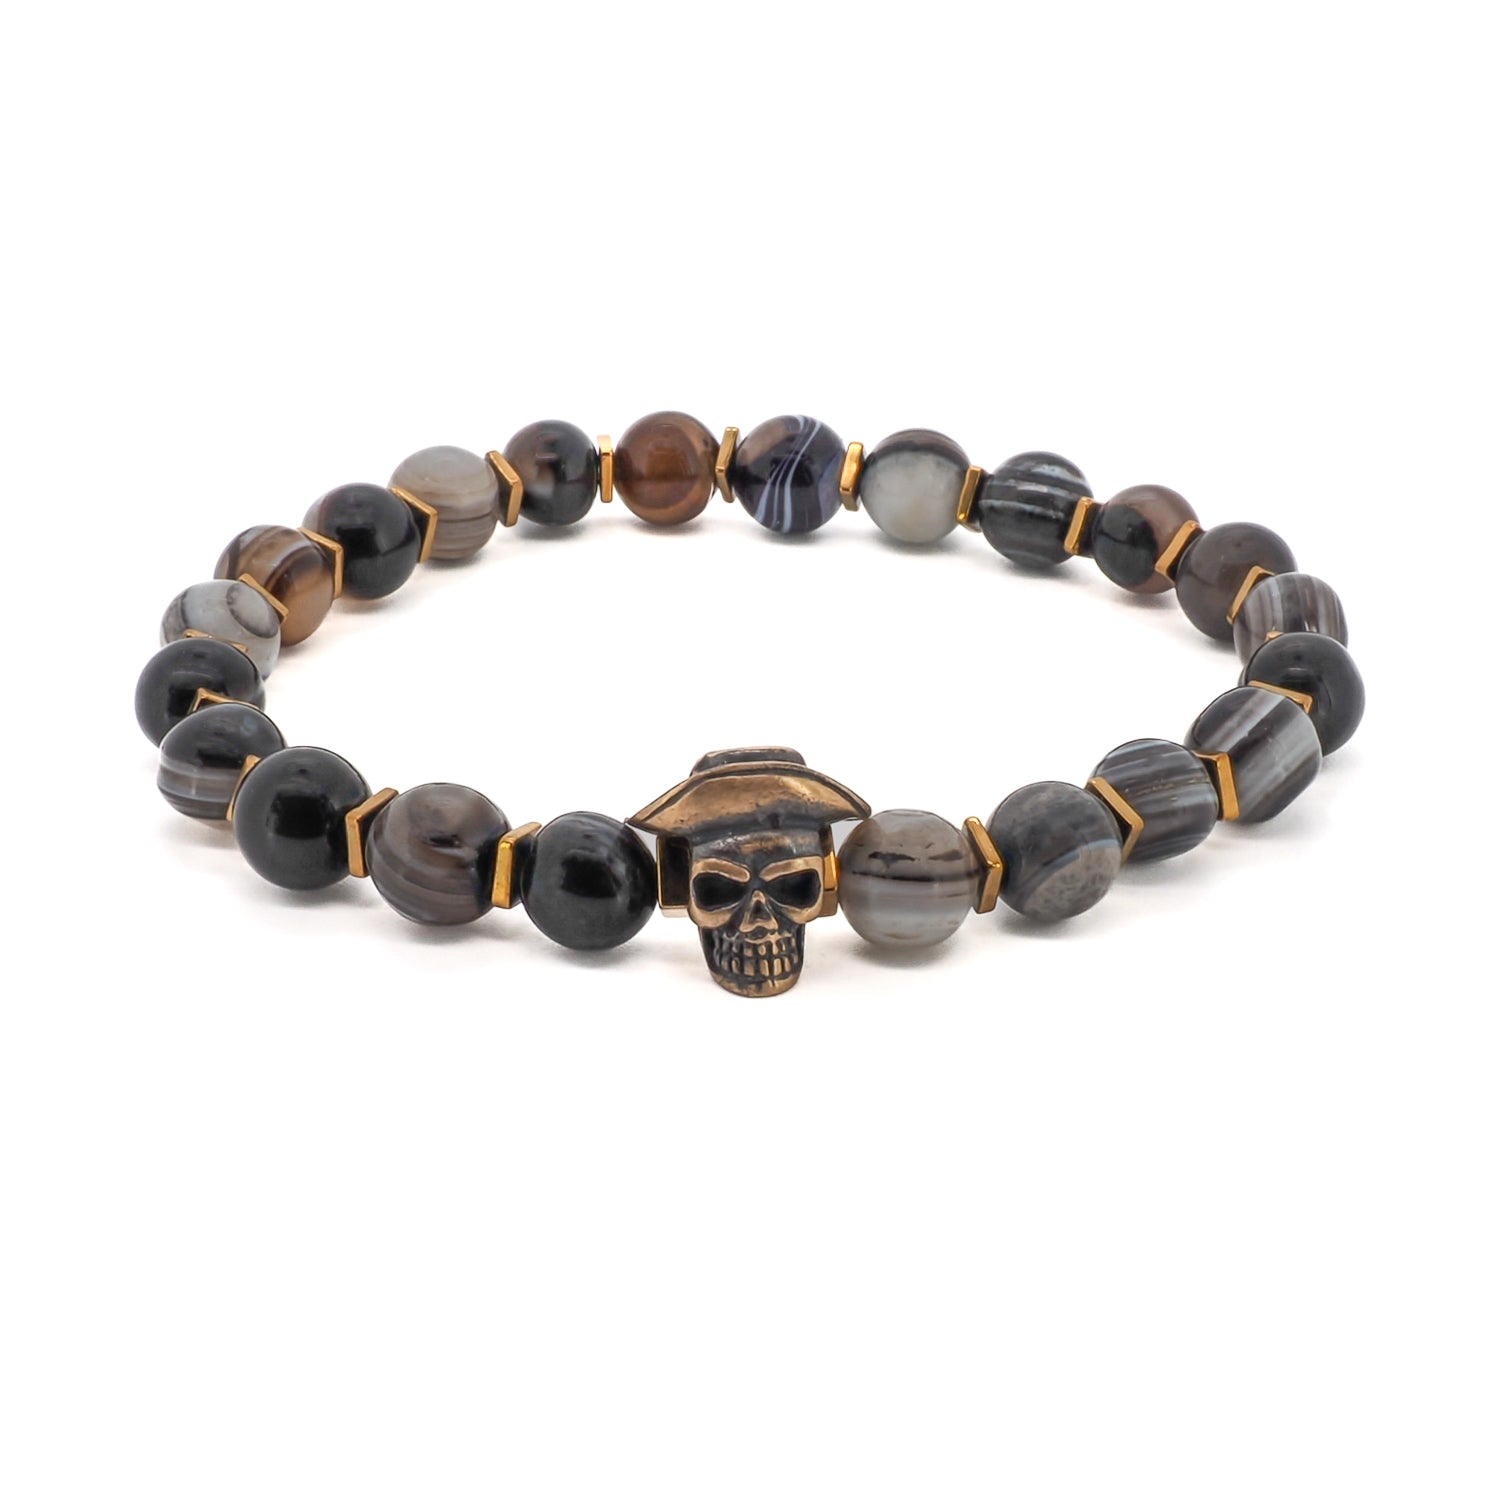 The Cowboy Hat Skull Agate Bracelet combines the natural beauty of Agate stone beads with a distinctive bronze cowboy hat skull charm. Handcrafted with attention to detail, this bracelet is a symbol of individuality and style.